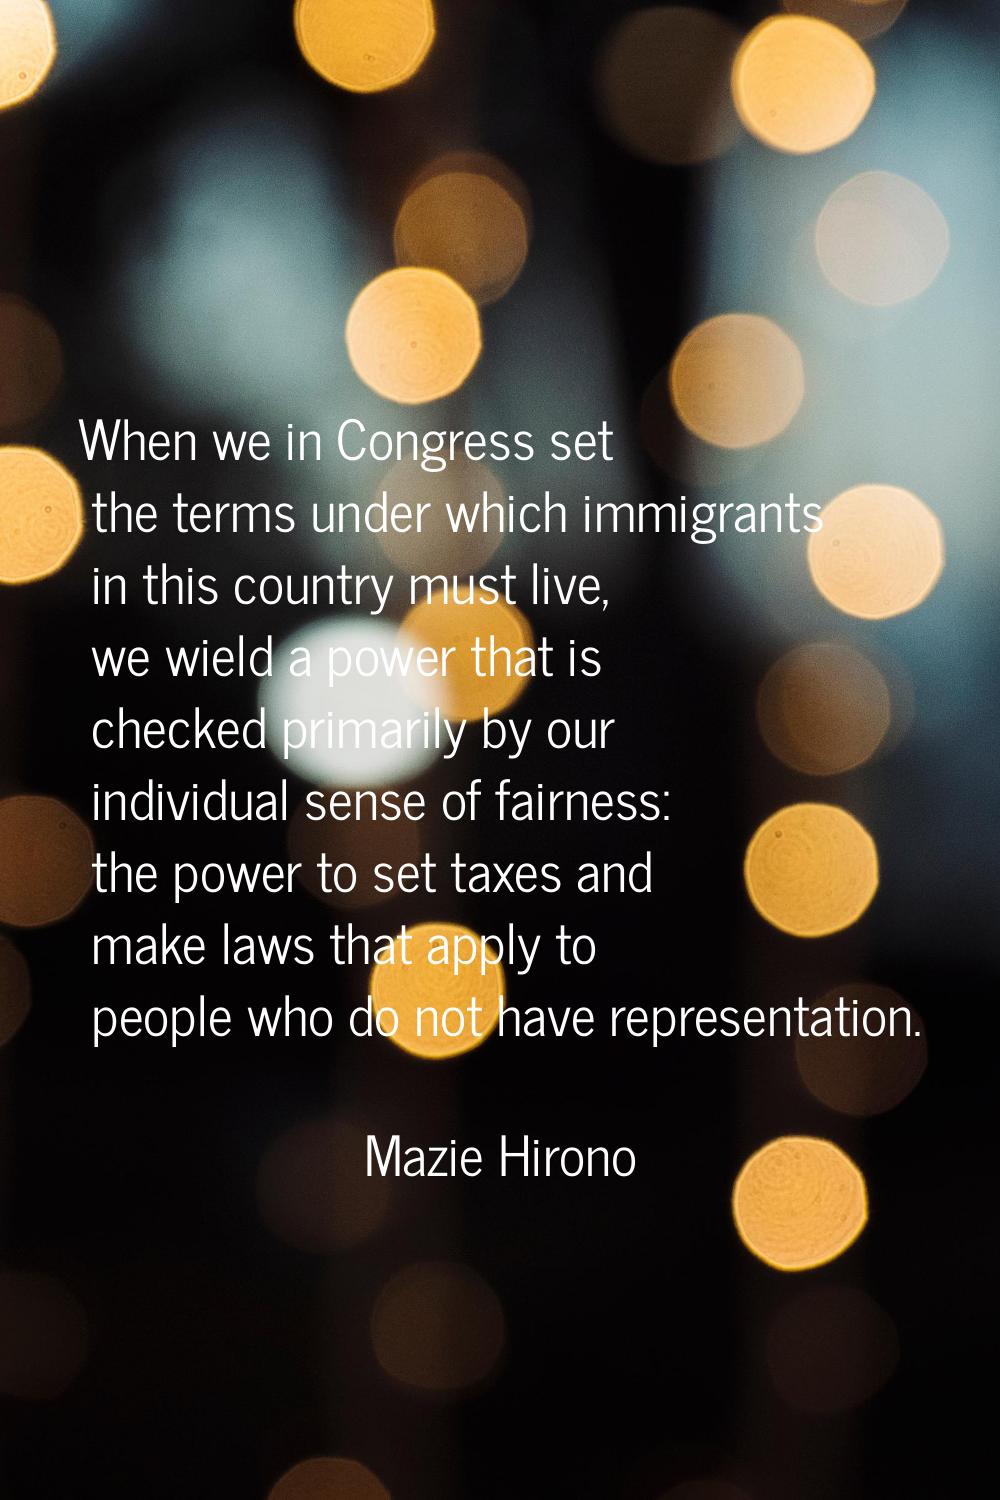 When we in Congress set the terms under which immigrants in this country must live, we wield a powe